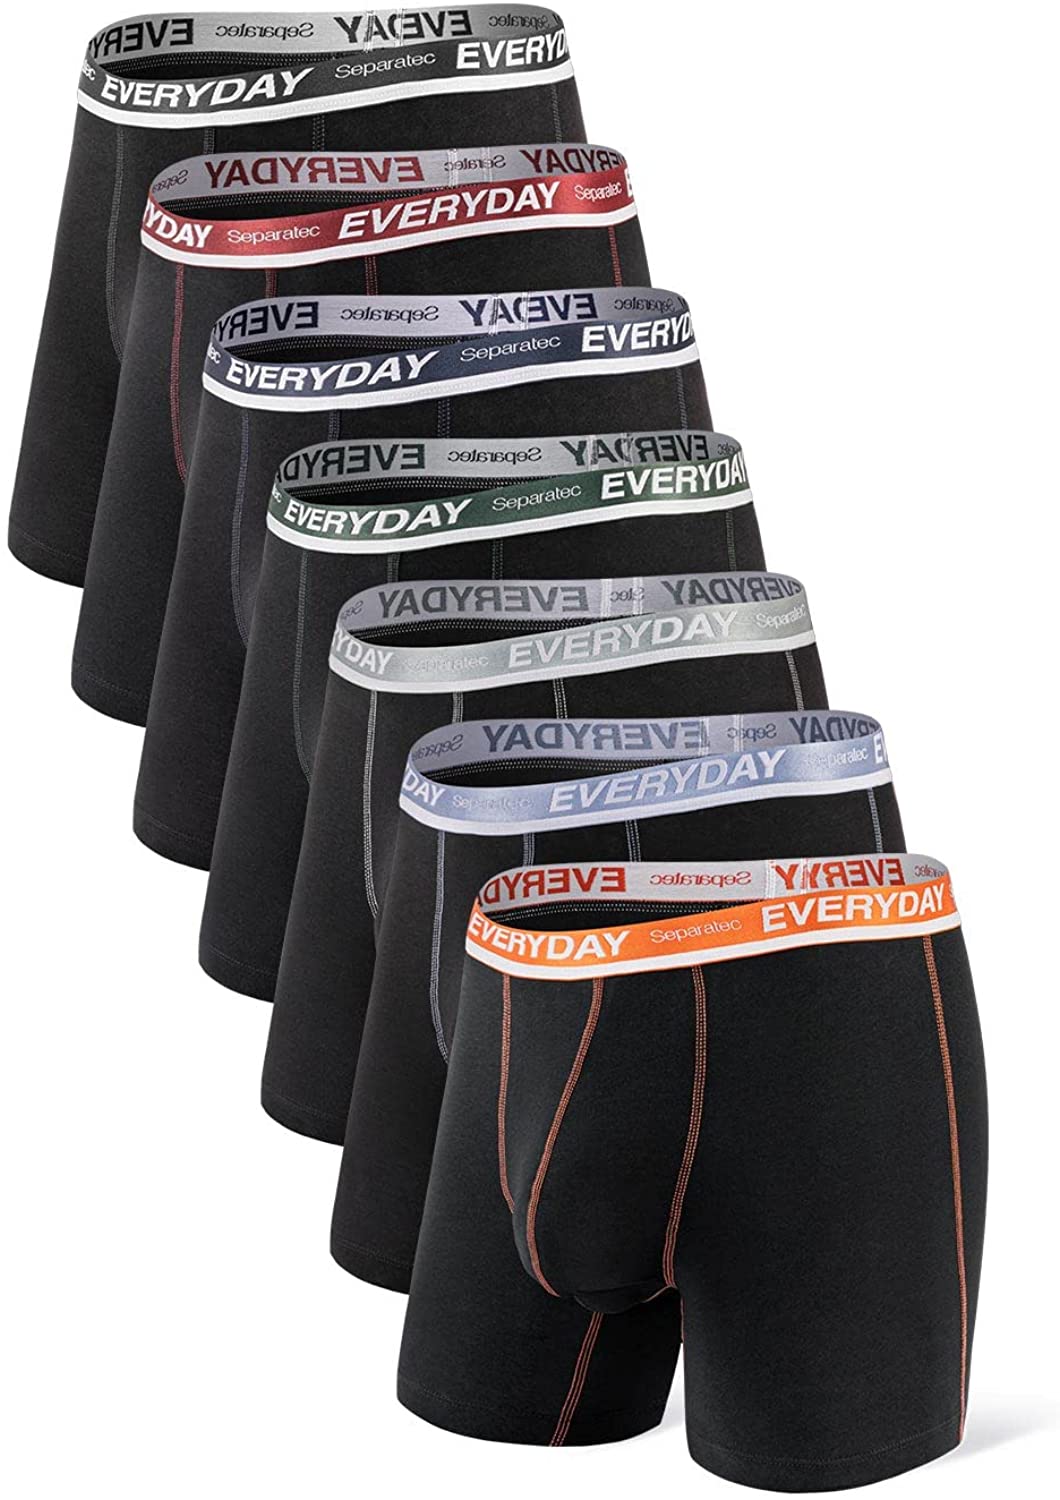 Men's 7 Pack Breathable Cotton Underwear Separated Pouch Colorful Everyday Boxer Briefs